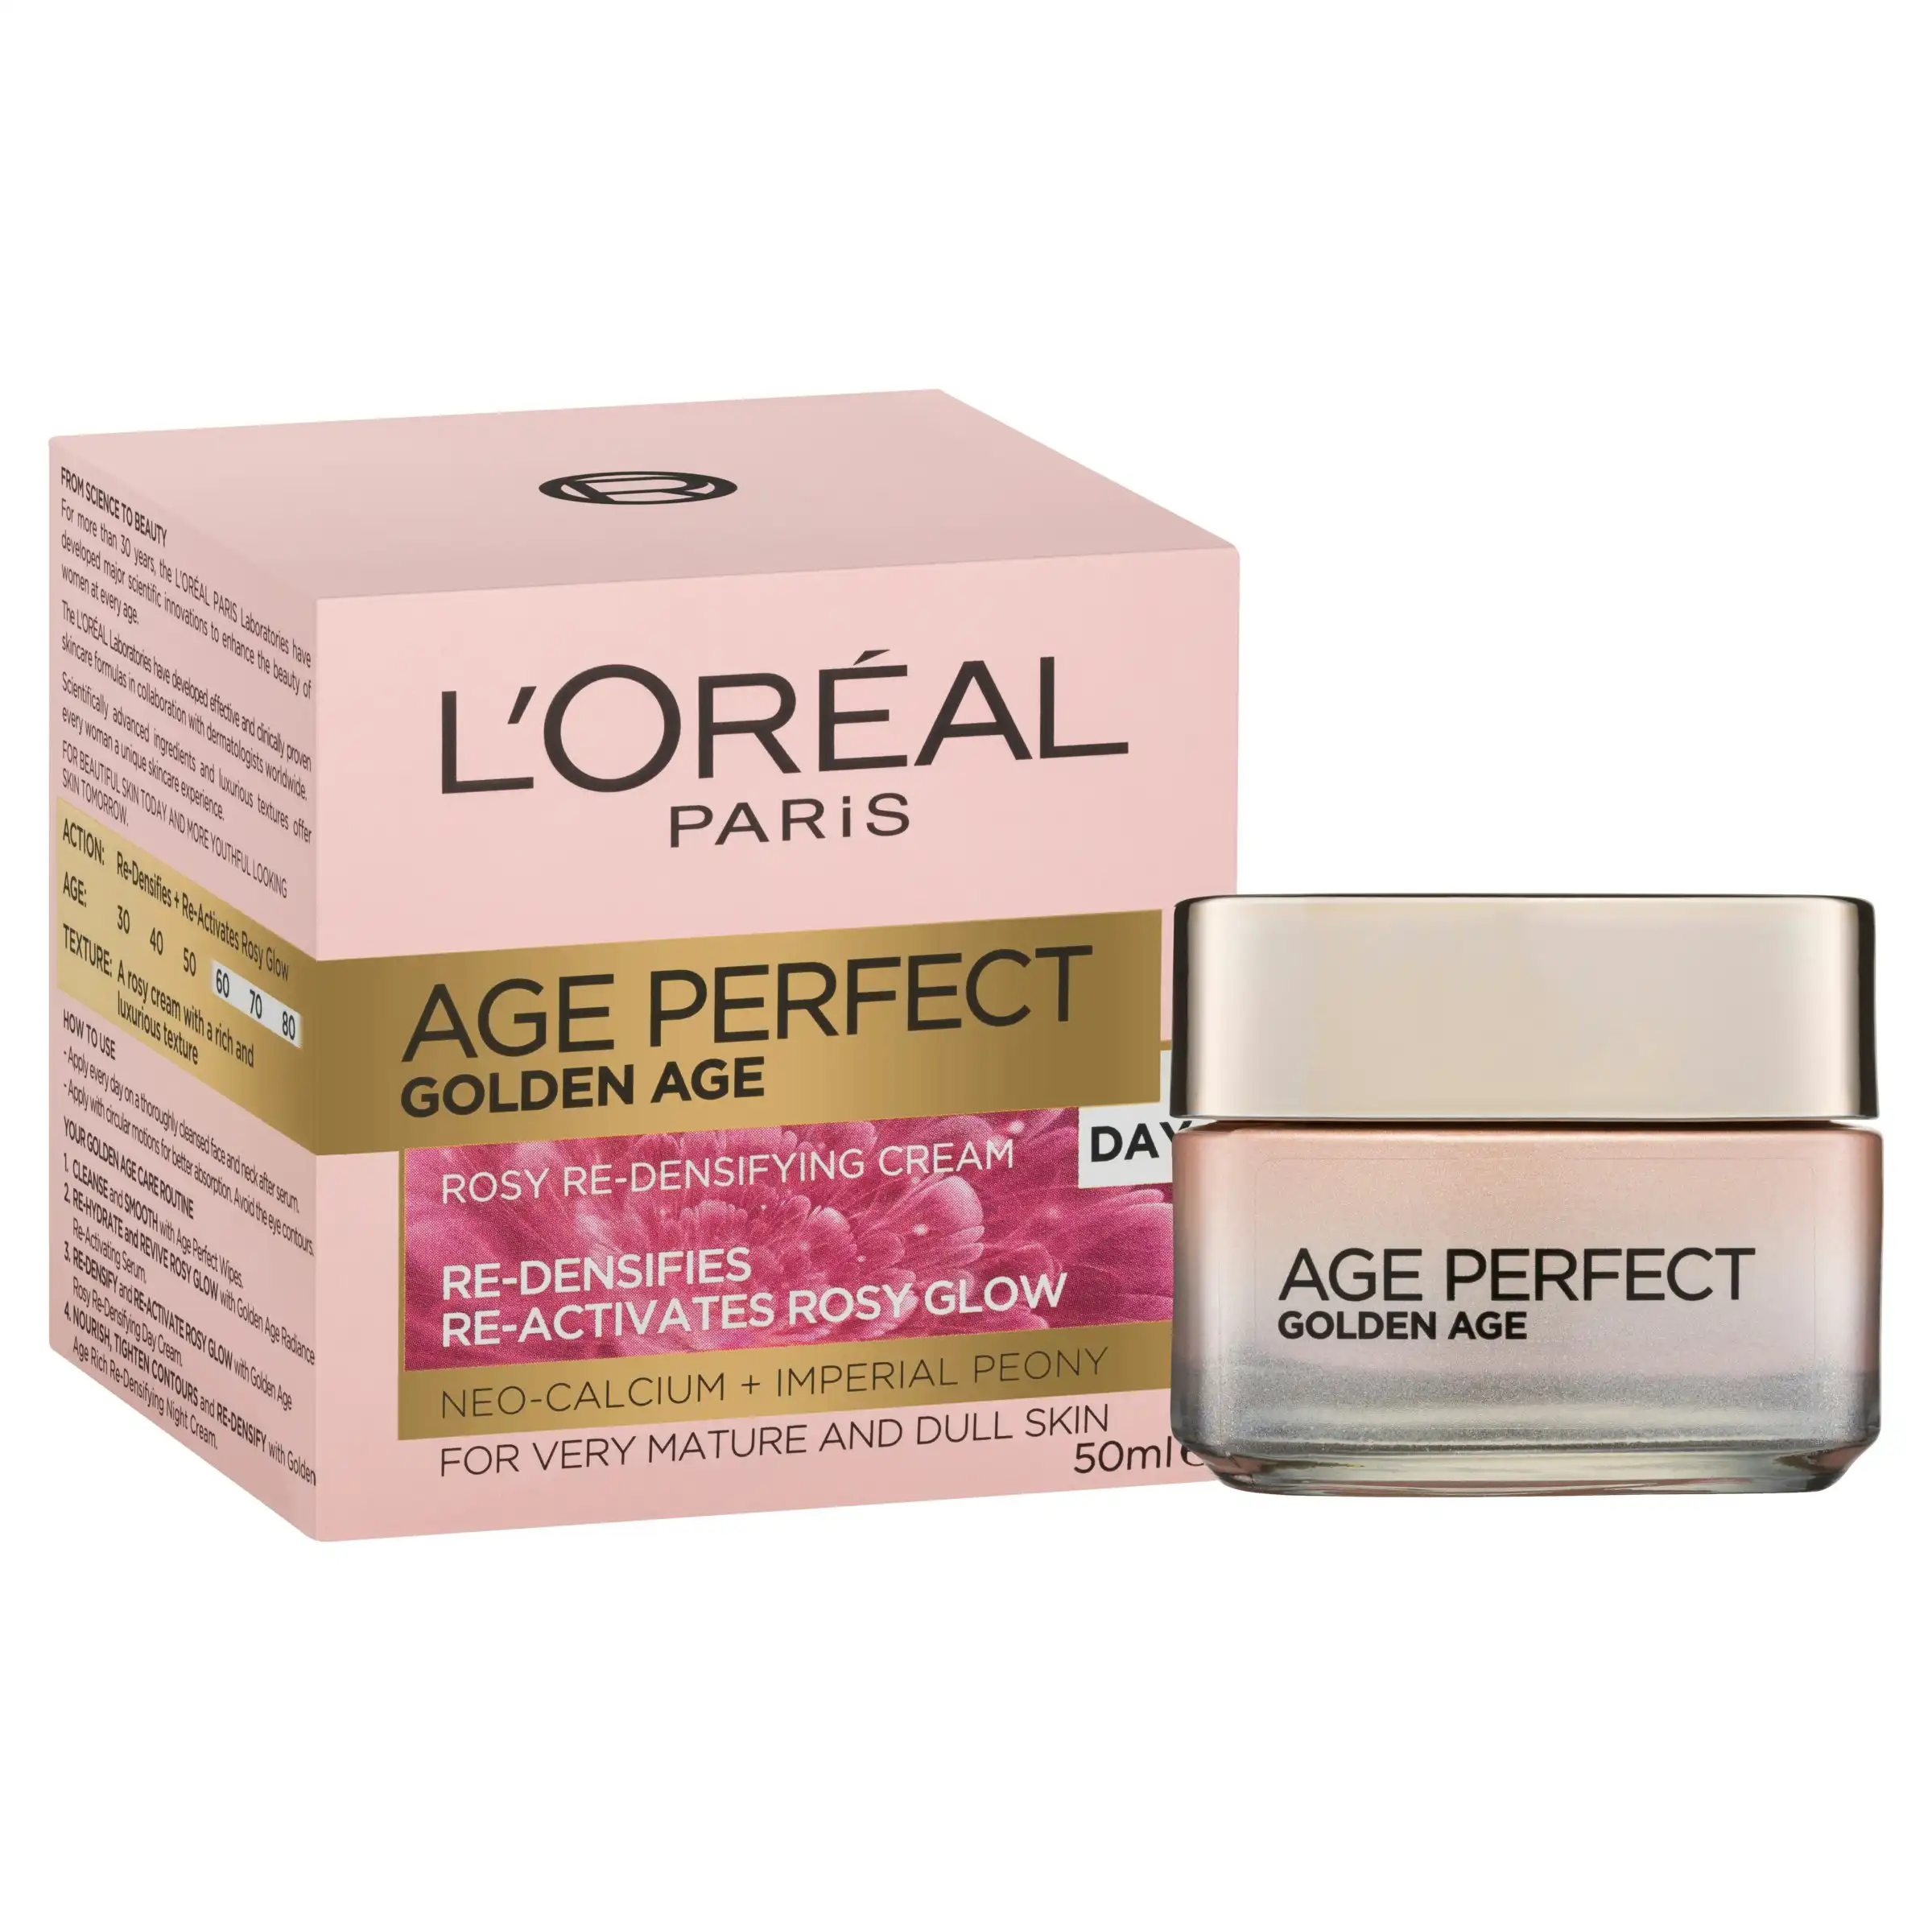 L'Oreal Paris Golden Age Rosy Re-Densifying Day Cream